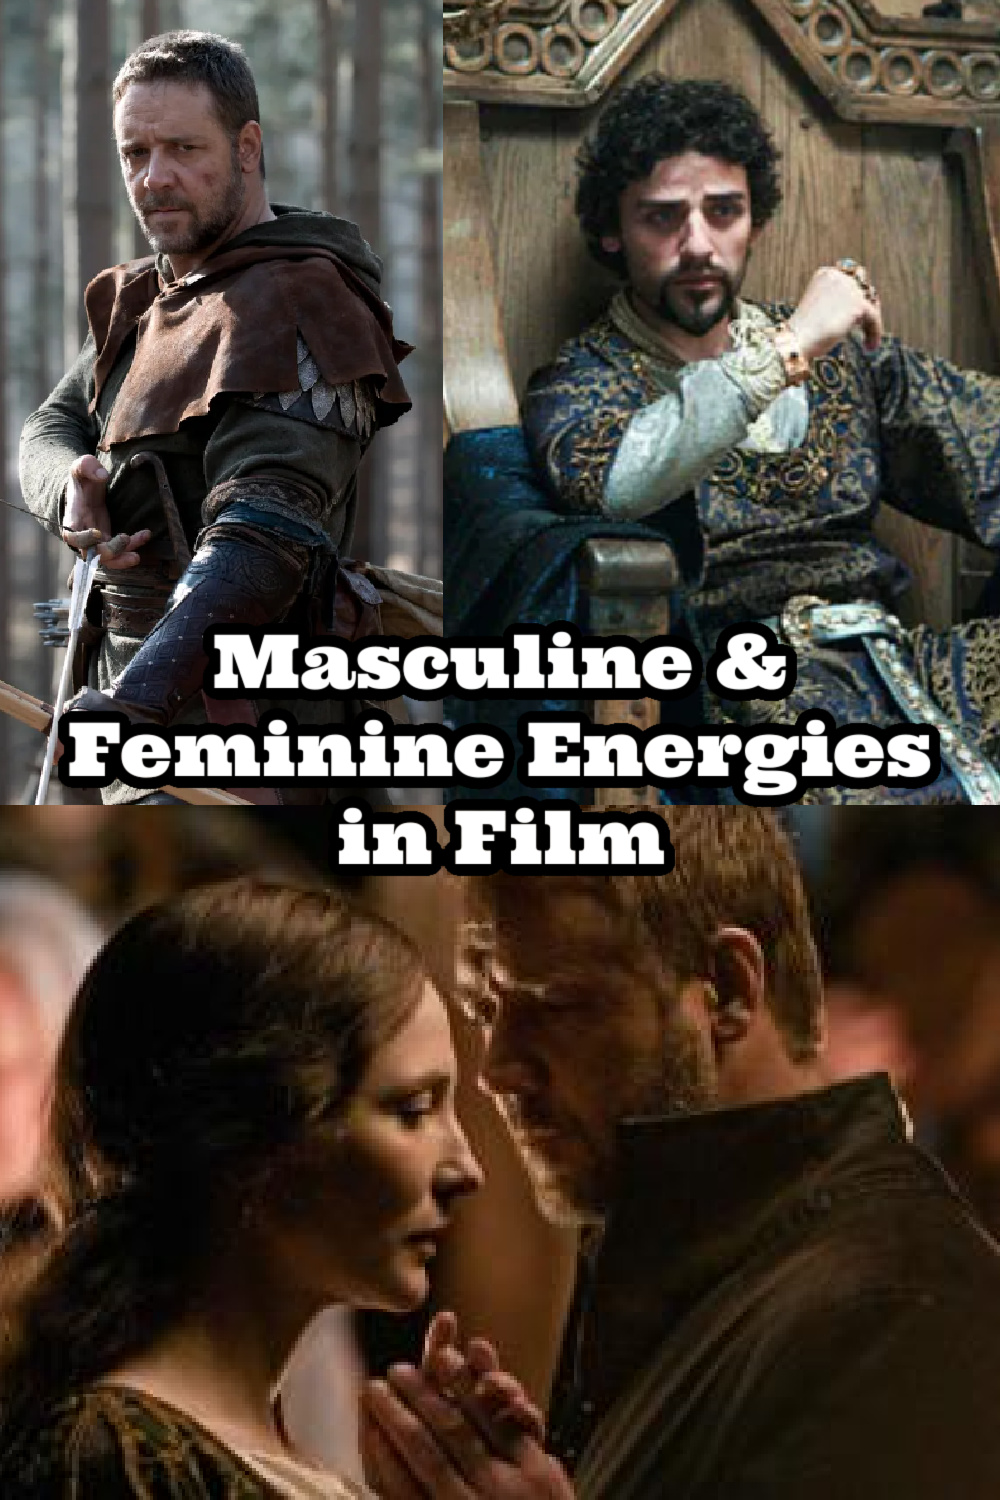 toxic masculinity vs divine masculinity, toxic masculinity vs healthy masculinity, the current crisis of masculinity, the rise of weak men, what is and is not toxic masculinity, robin hood 2010 explained, robin hood 2010 review, wounded masculine vs healthy masculine, healthy masculinity vs toxic masculinity, masculine and feminine energy, masculine and feminine energy in relationships, understanding masculine and feminine energy, sexual polarity in relationships, sexual polarity, sexual polarity masculine feminine, masculine and feminine examples, Everyday starlet, sarah blodgett,